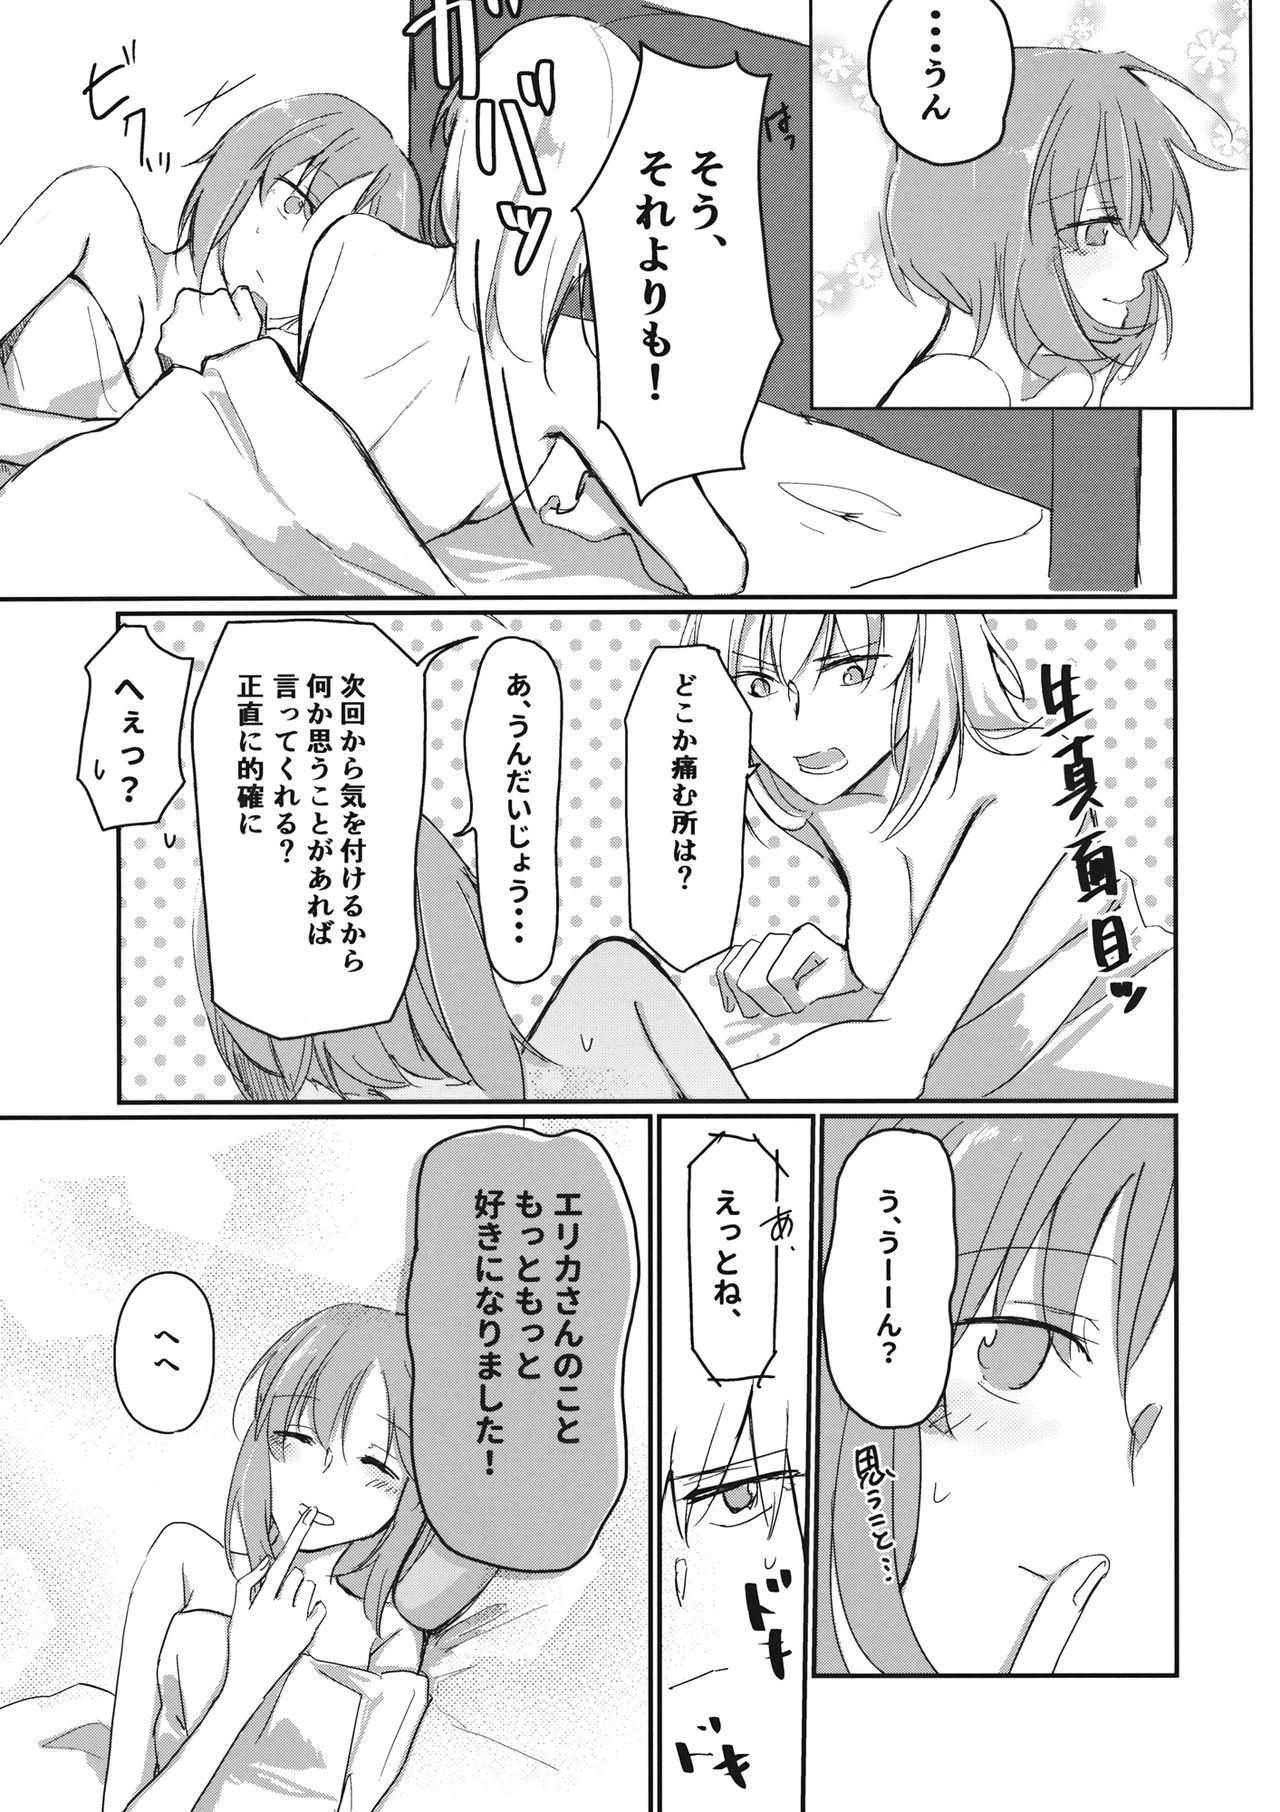 Party for the first time - Girls und panzer Babe - Page 24